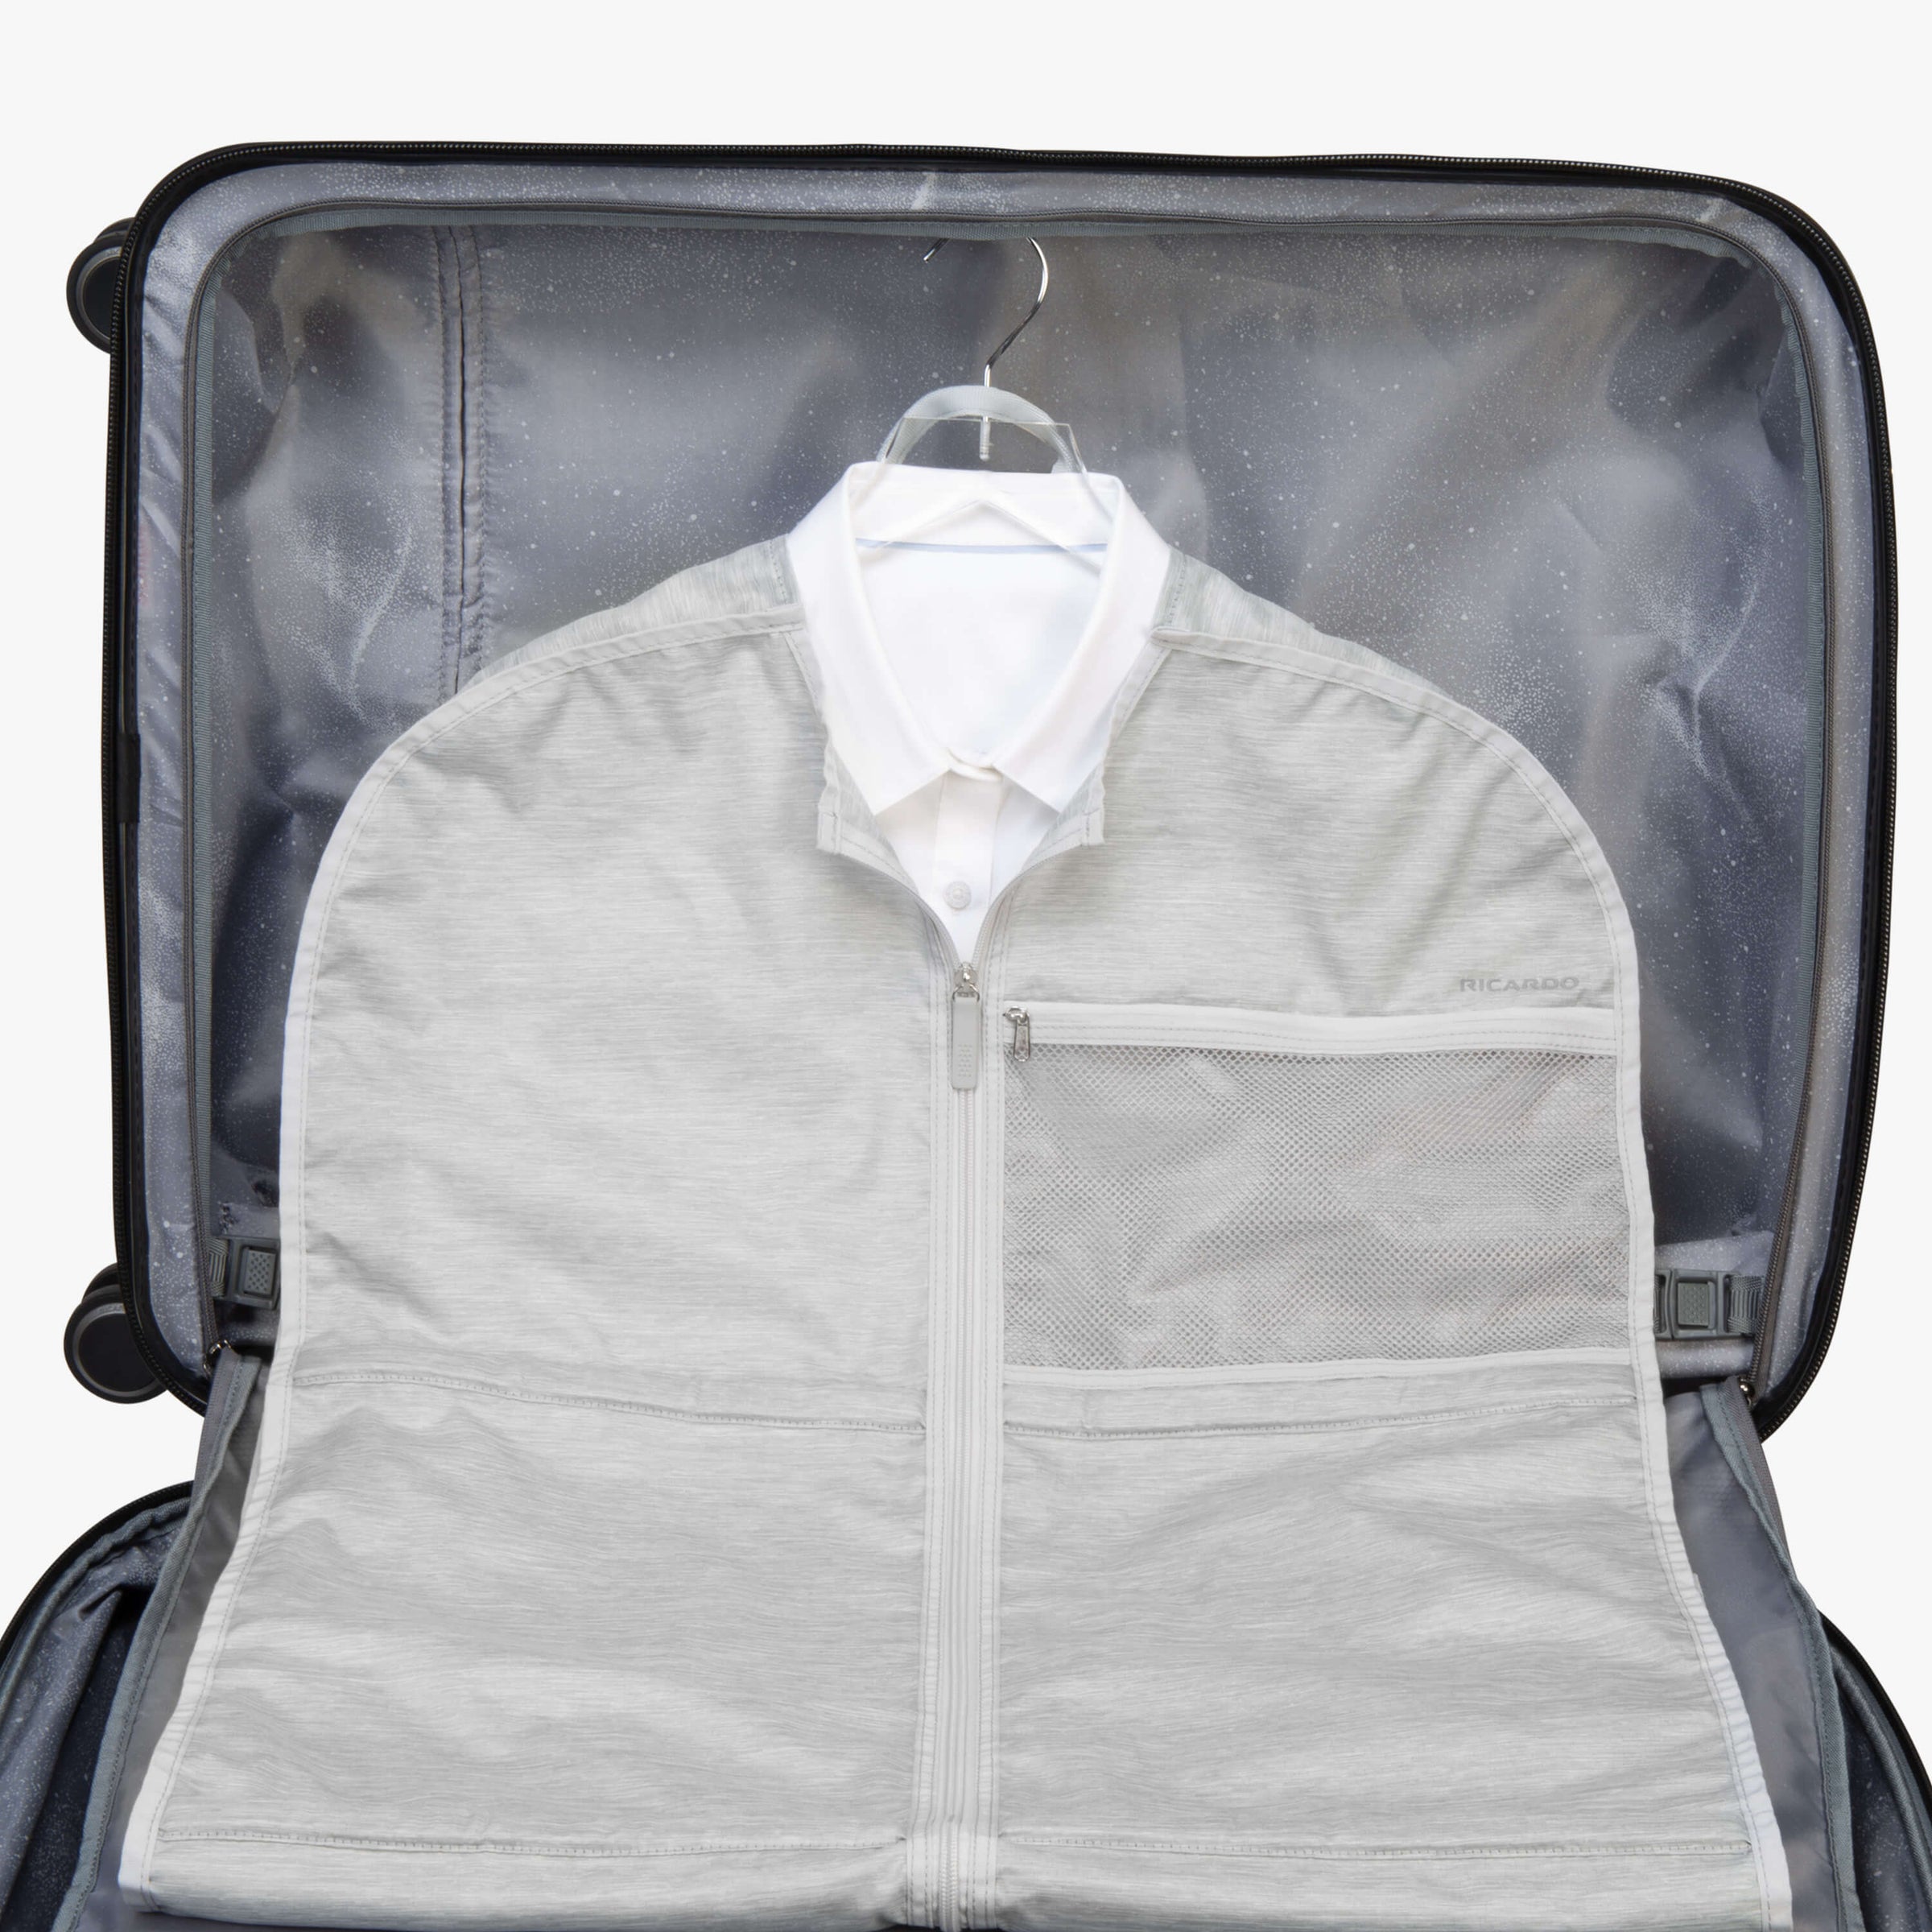 Essentials Large Garment Sleeve in Cloud Case View~~Color:Cloud~~Description:Packed for Travel